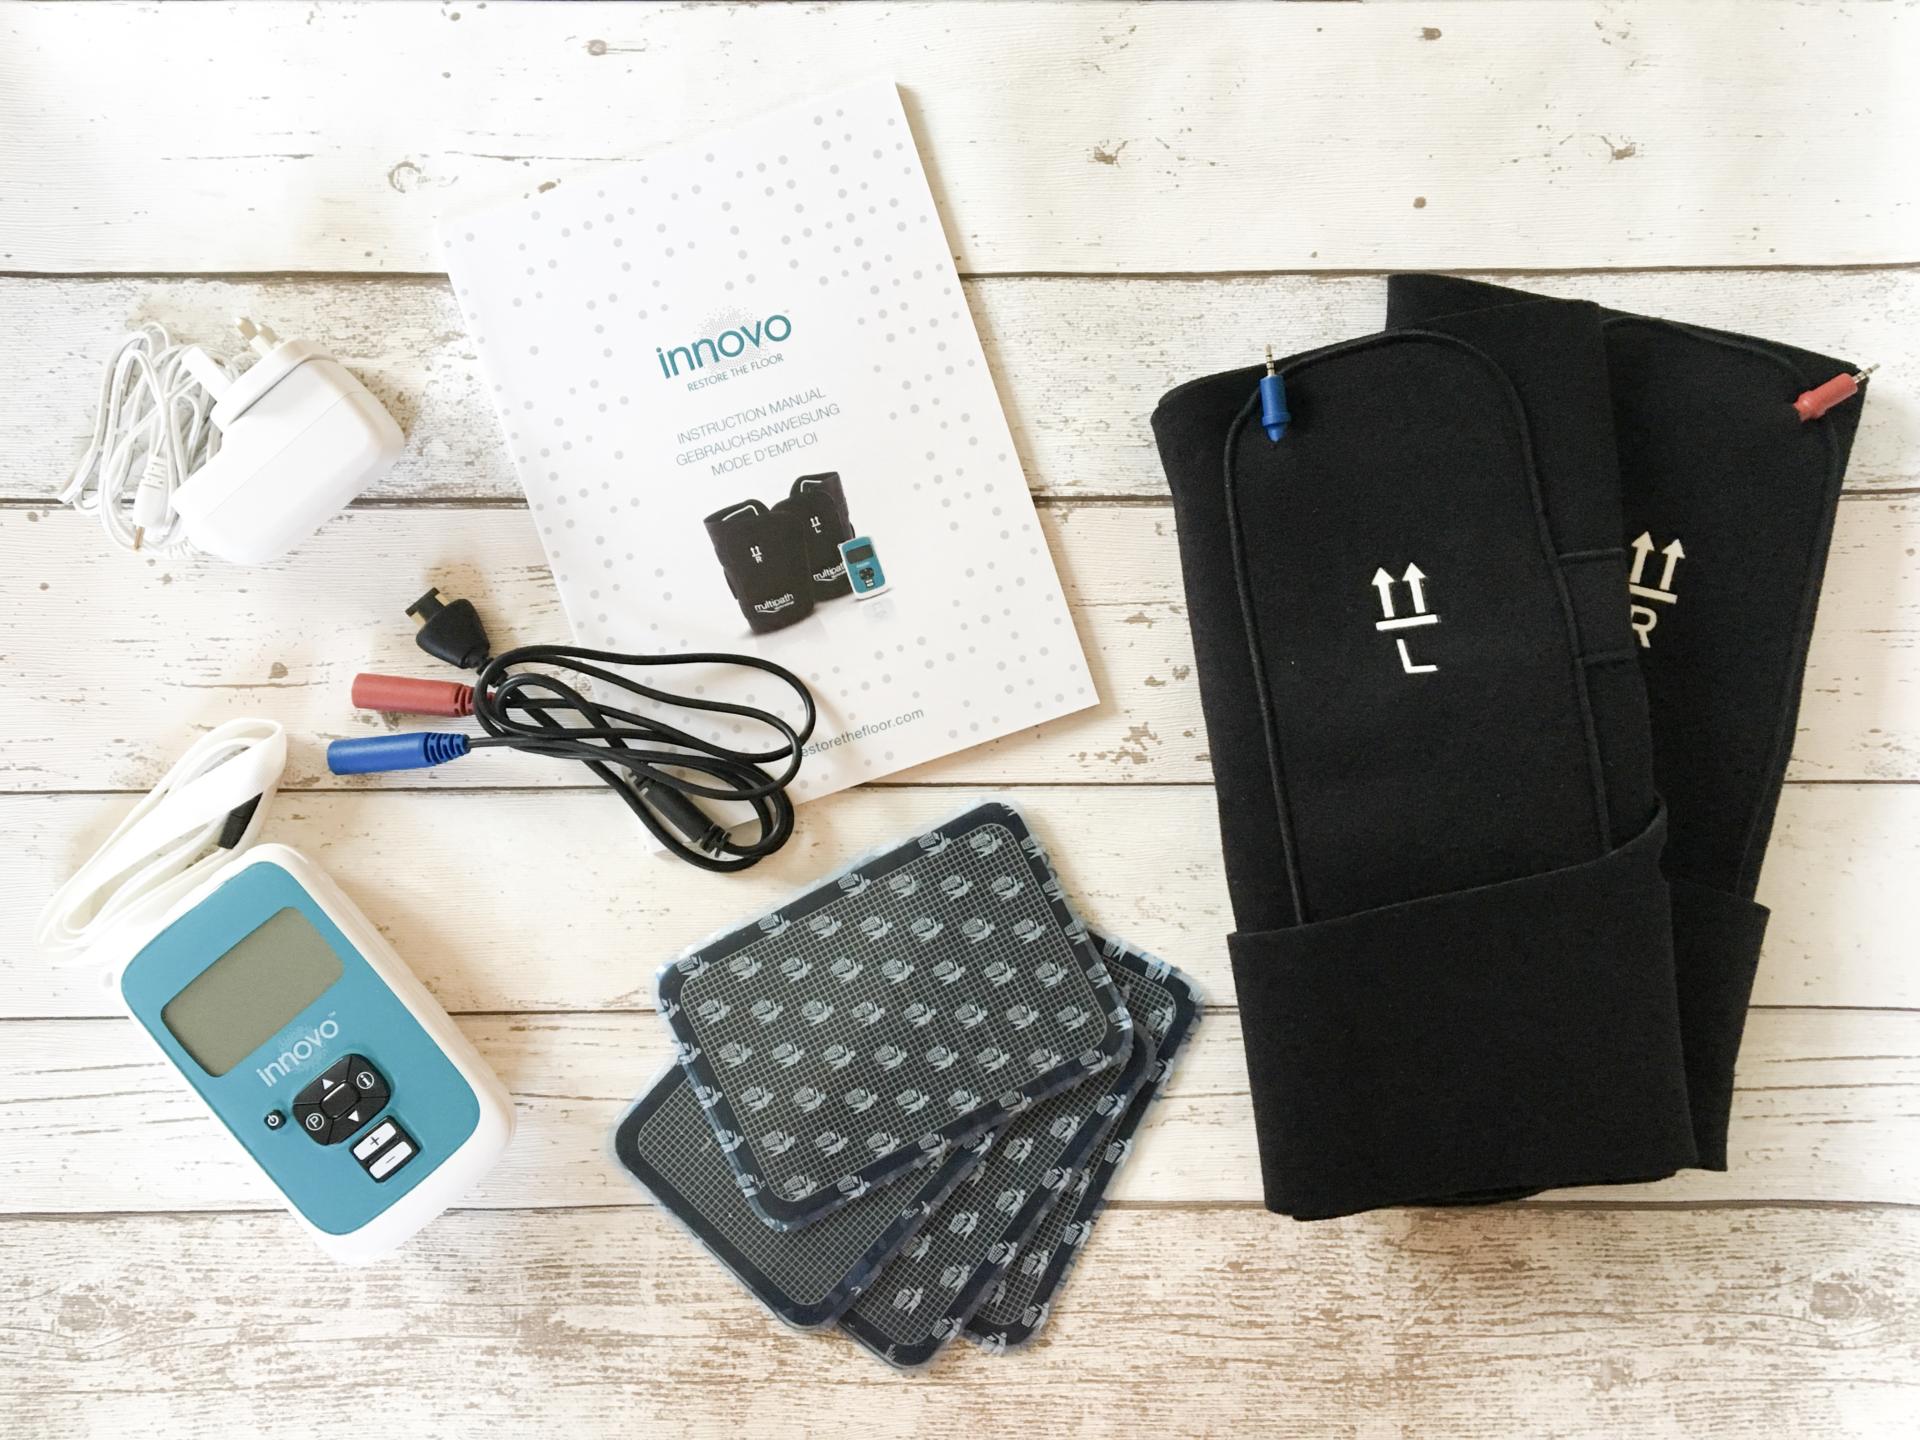 Innovo reviews: six weeks on, has Innovo made a difference?